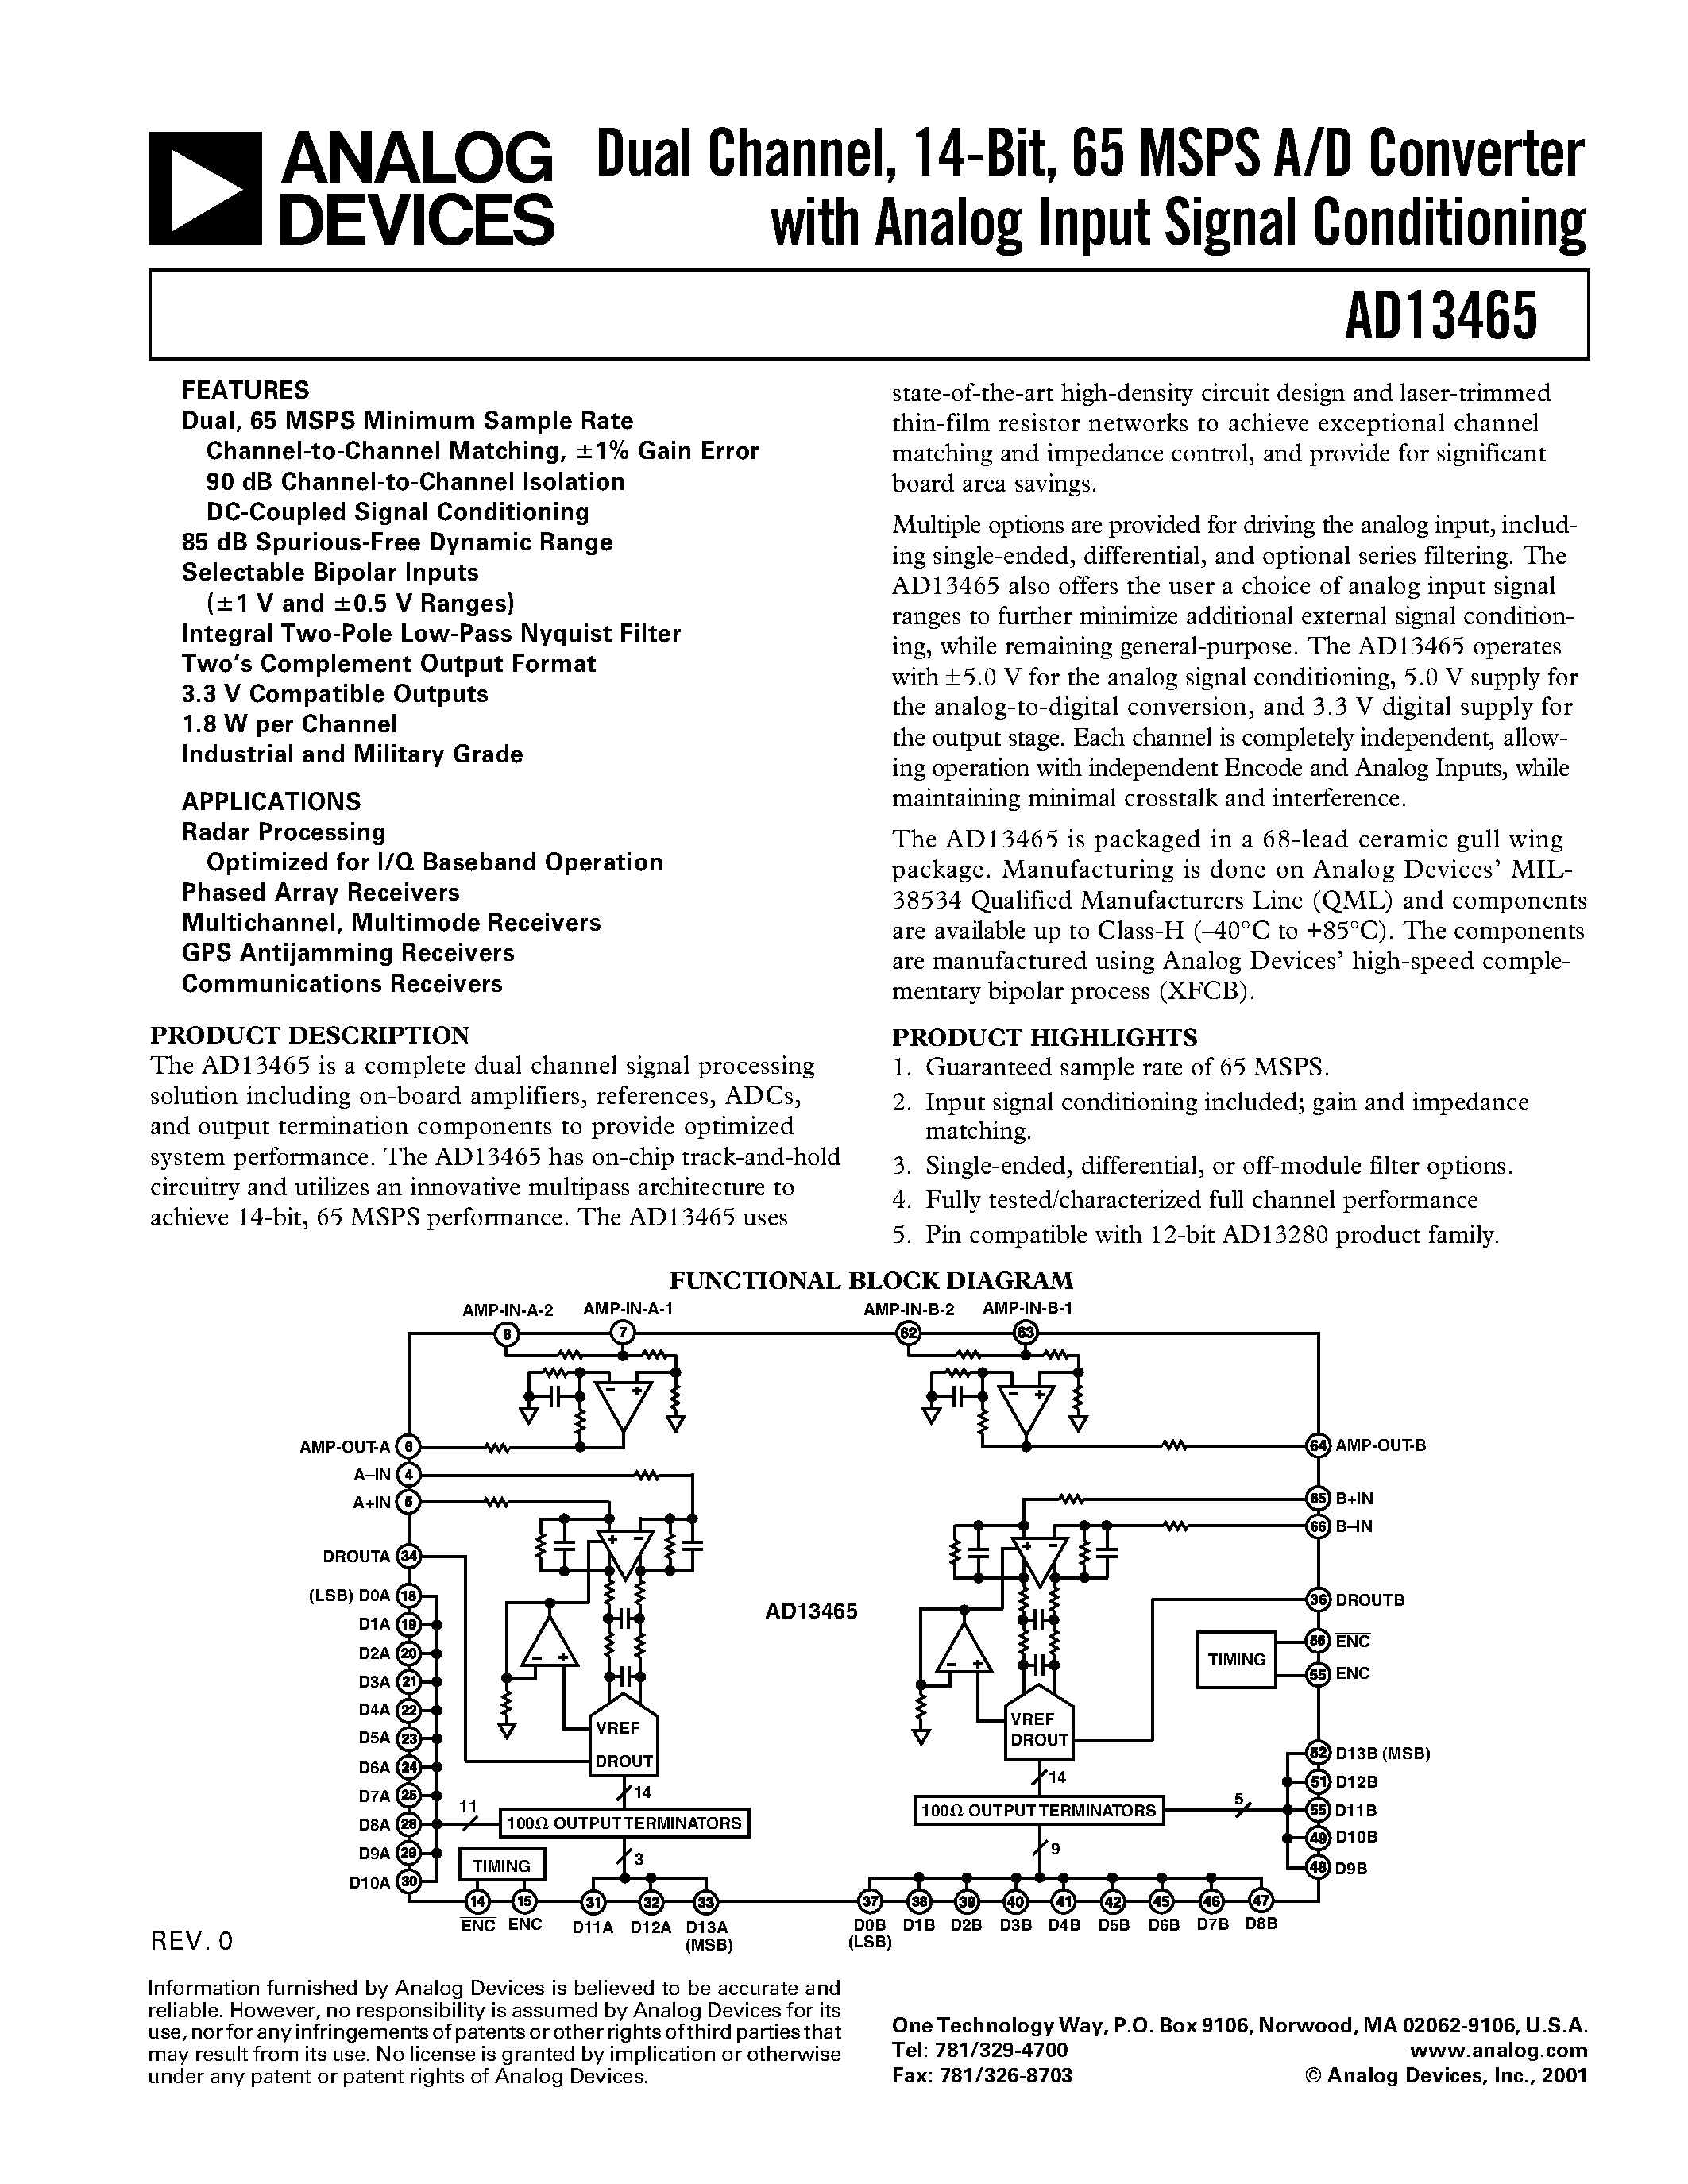 Datasheet AD13465AZ - Dual Channel/ 14-Bit/ 65 MSPS A/D Converter with Analog Input Signal Conditioning page 1